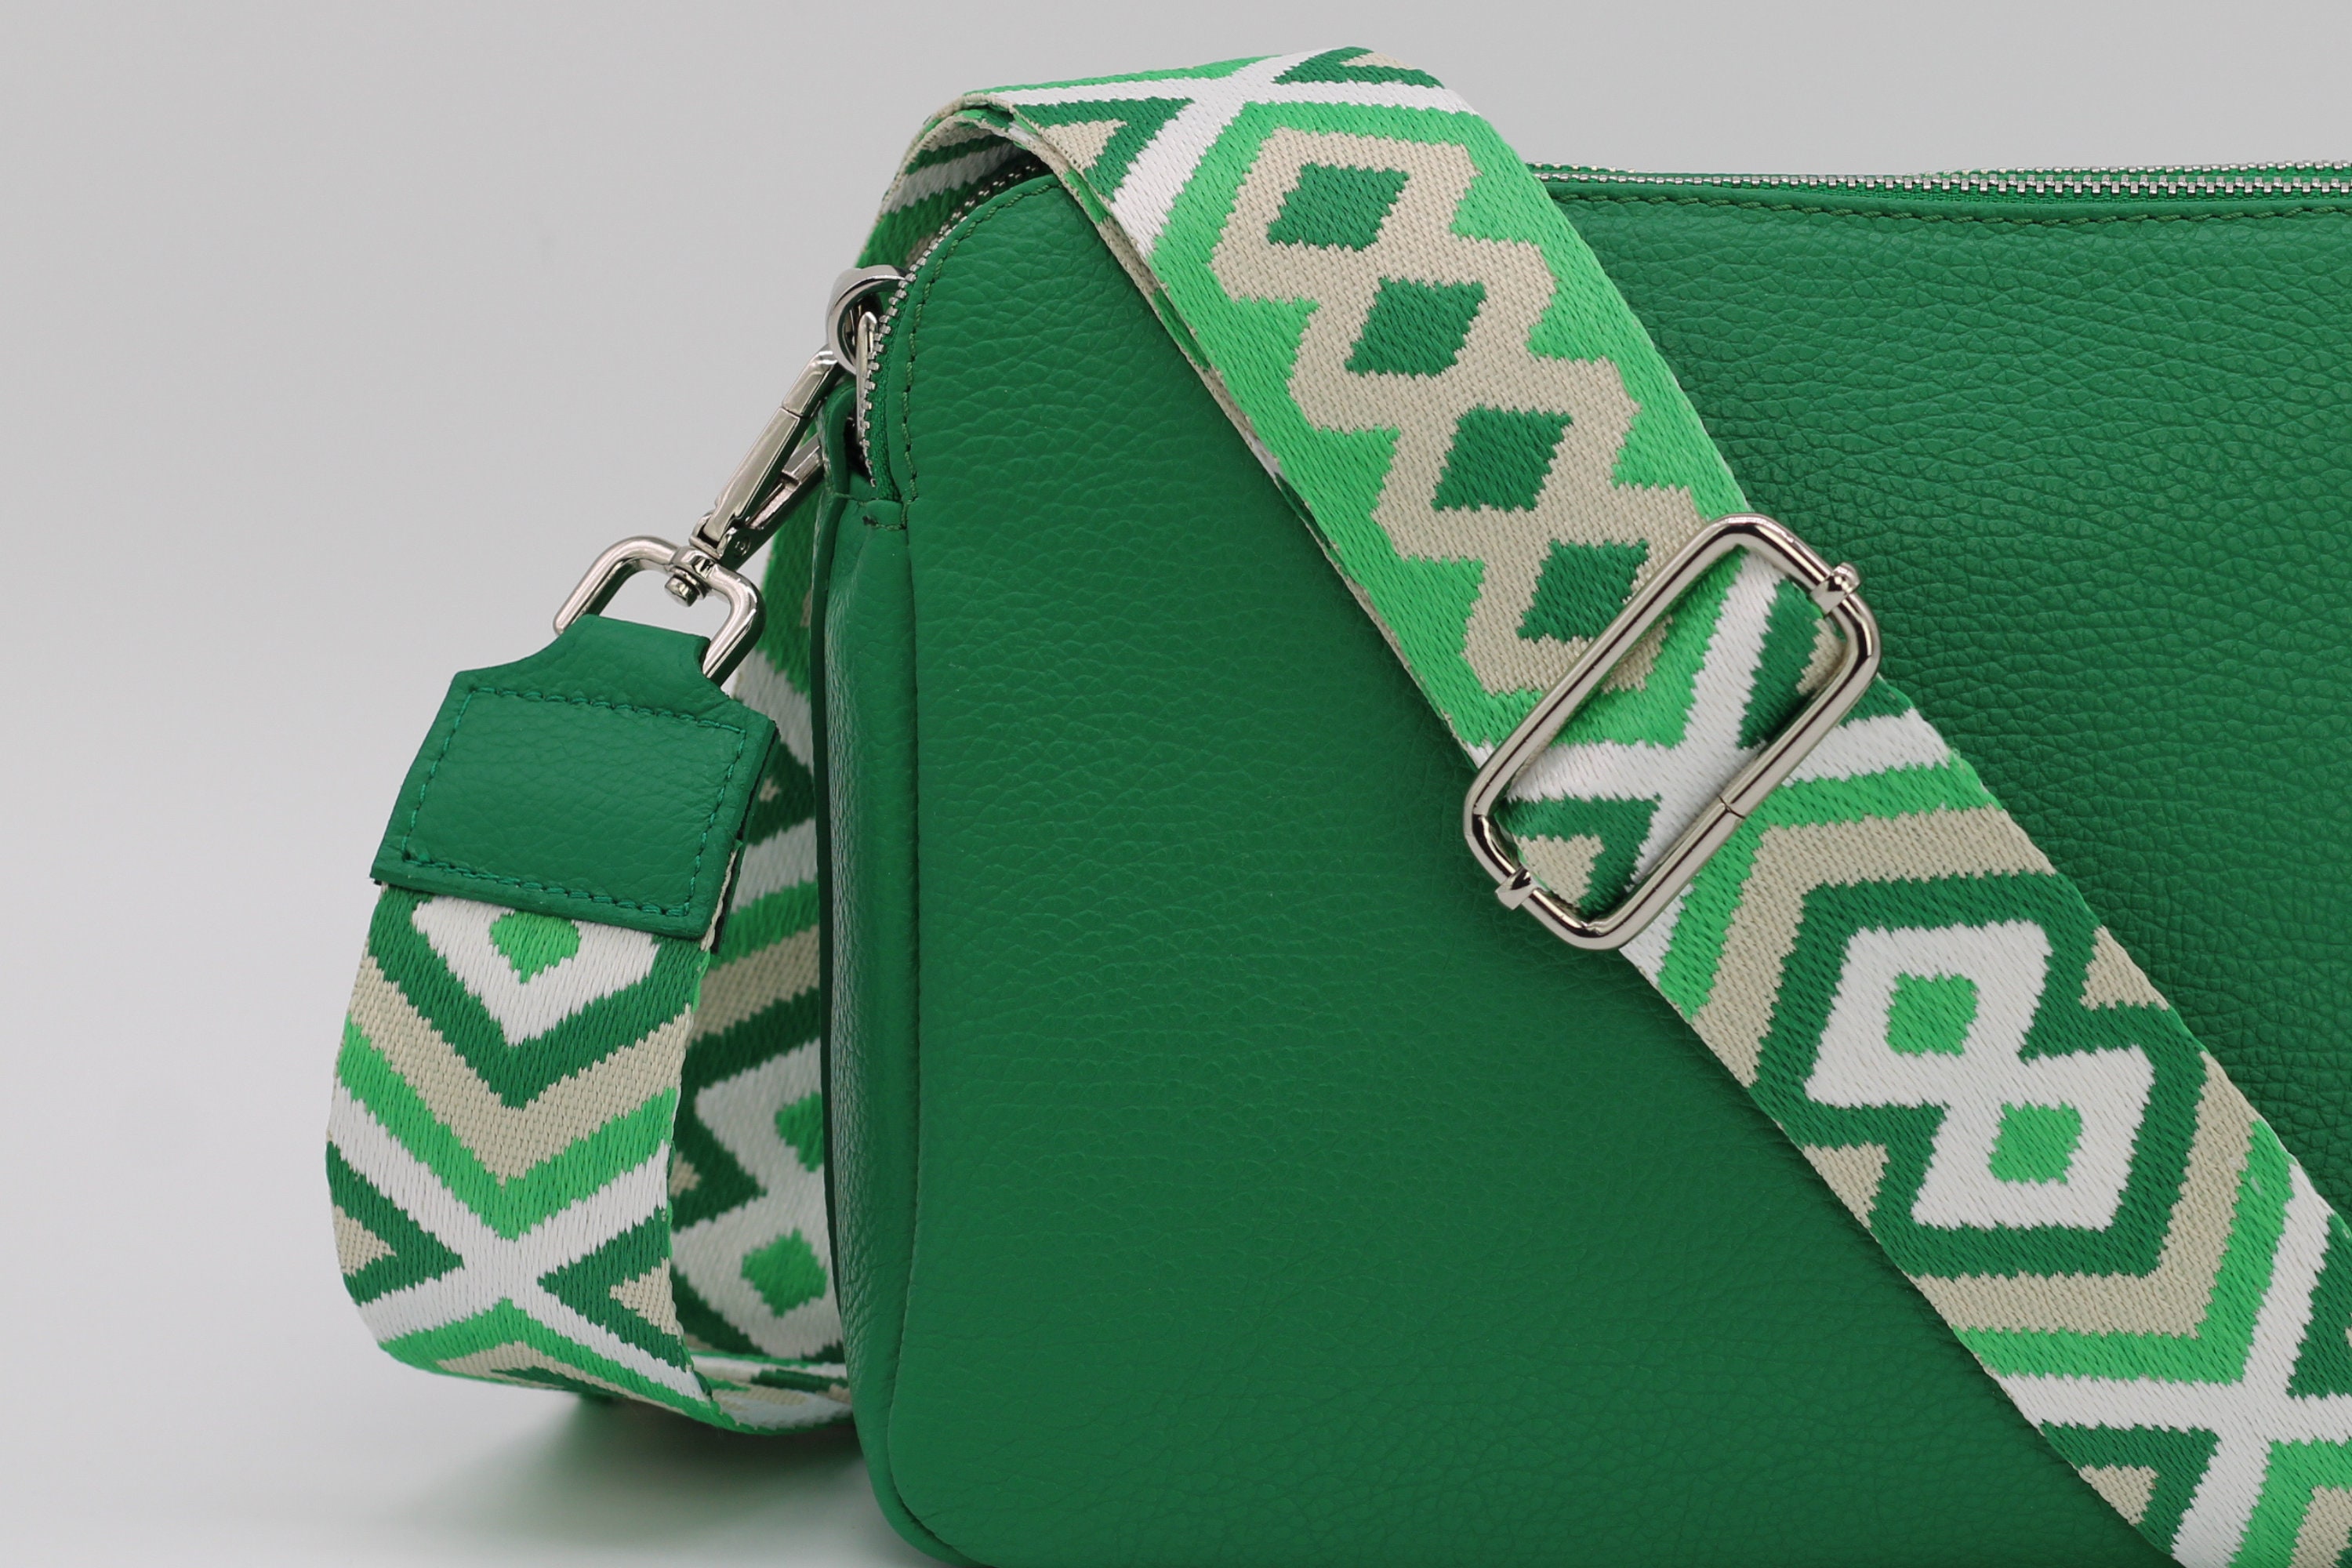 Green Patterned Bag Straps Crossbody Strap Changeable Bag 